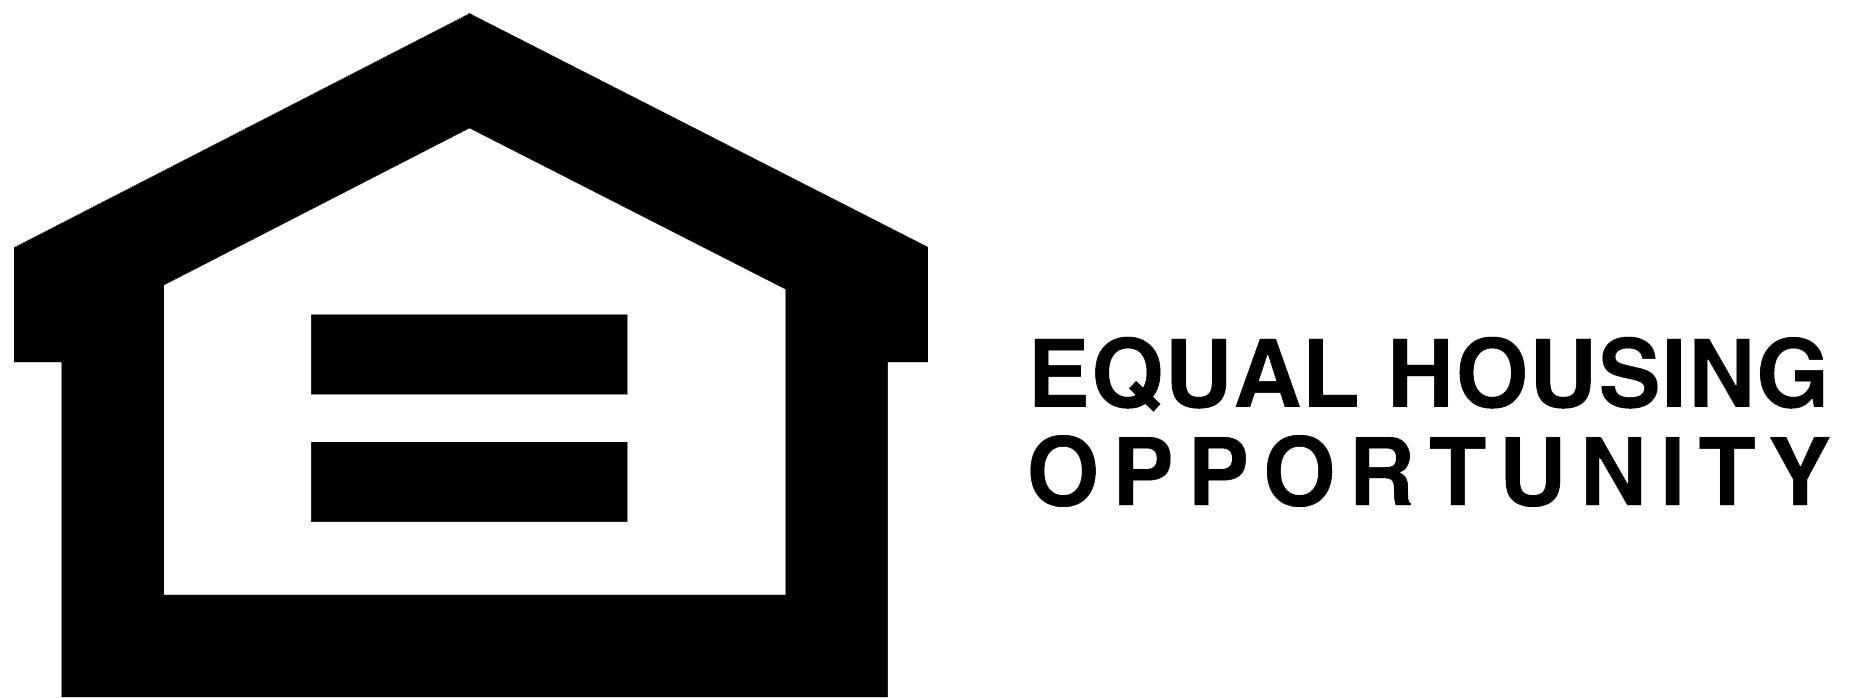 Equal Housing Opportunity Logo - Equal Housing Logo, Equal Housing Symbol, Meaning, History and Evolution